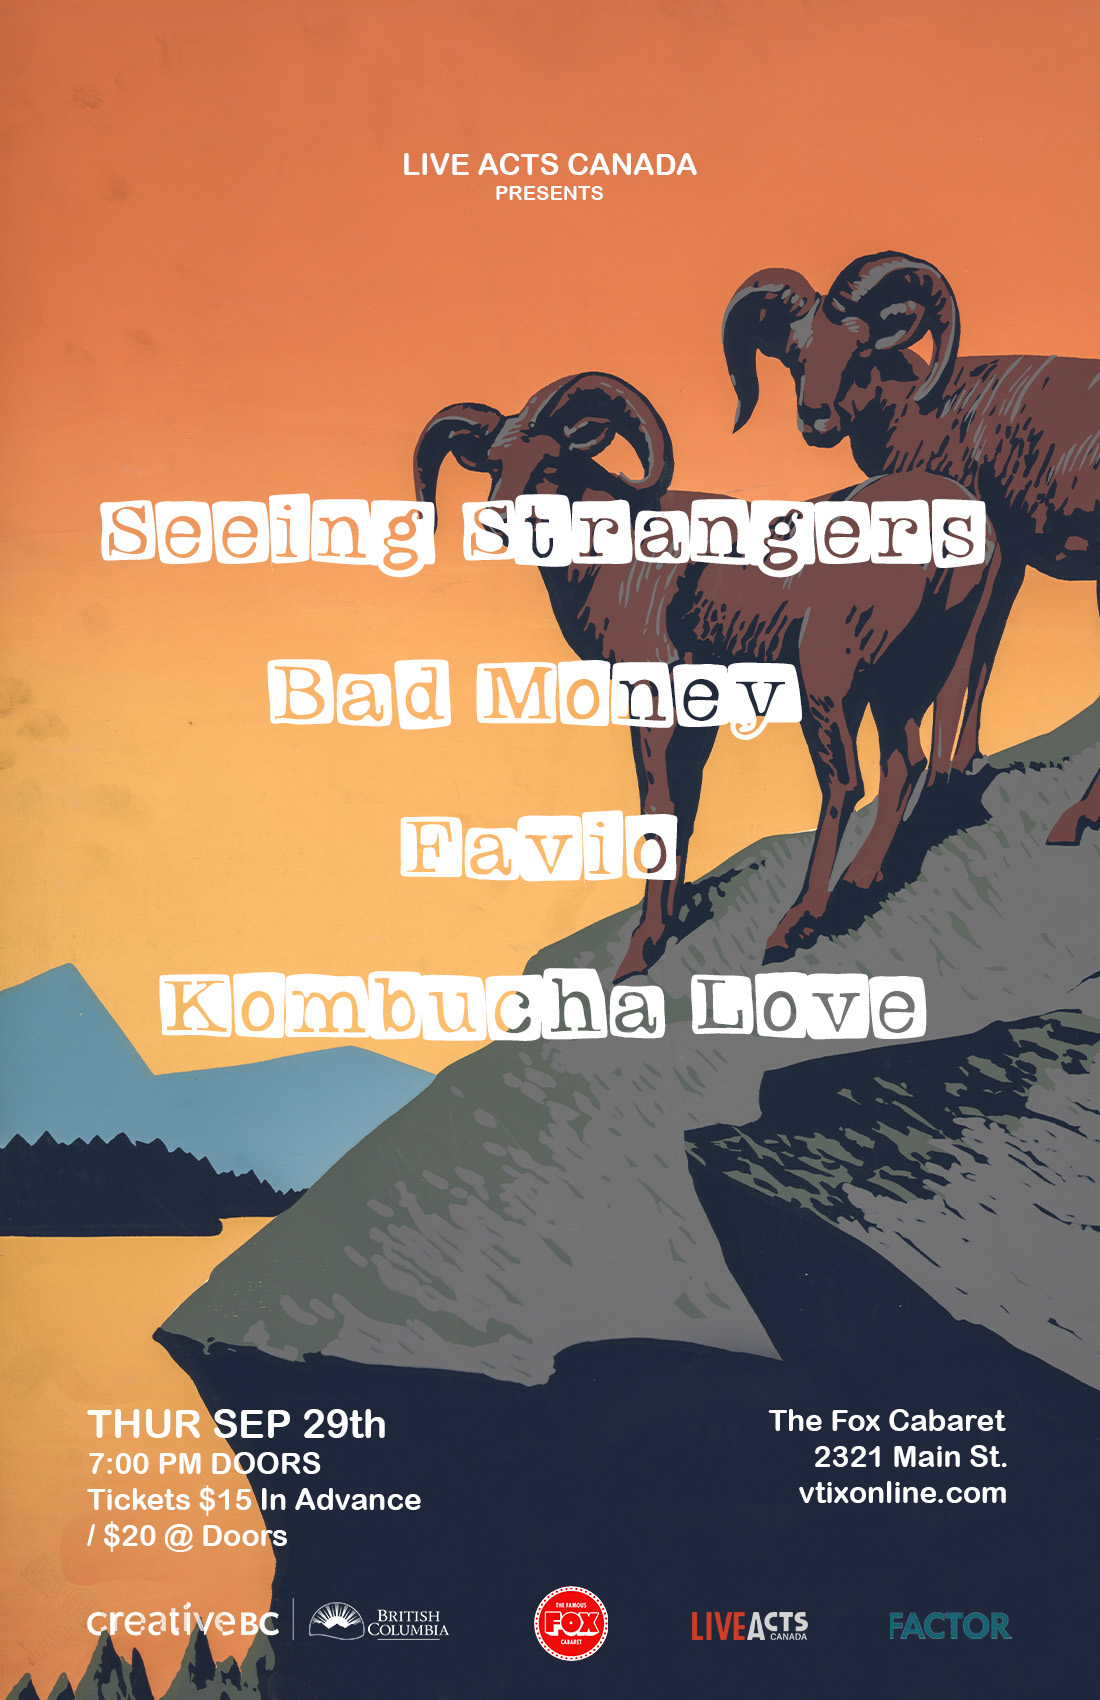 Seeing Strangers with Special Guests Bad Money, Favio, and Kombucha Love